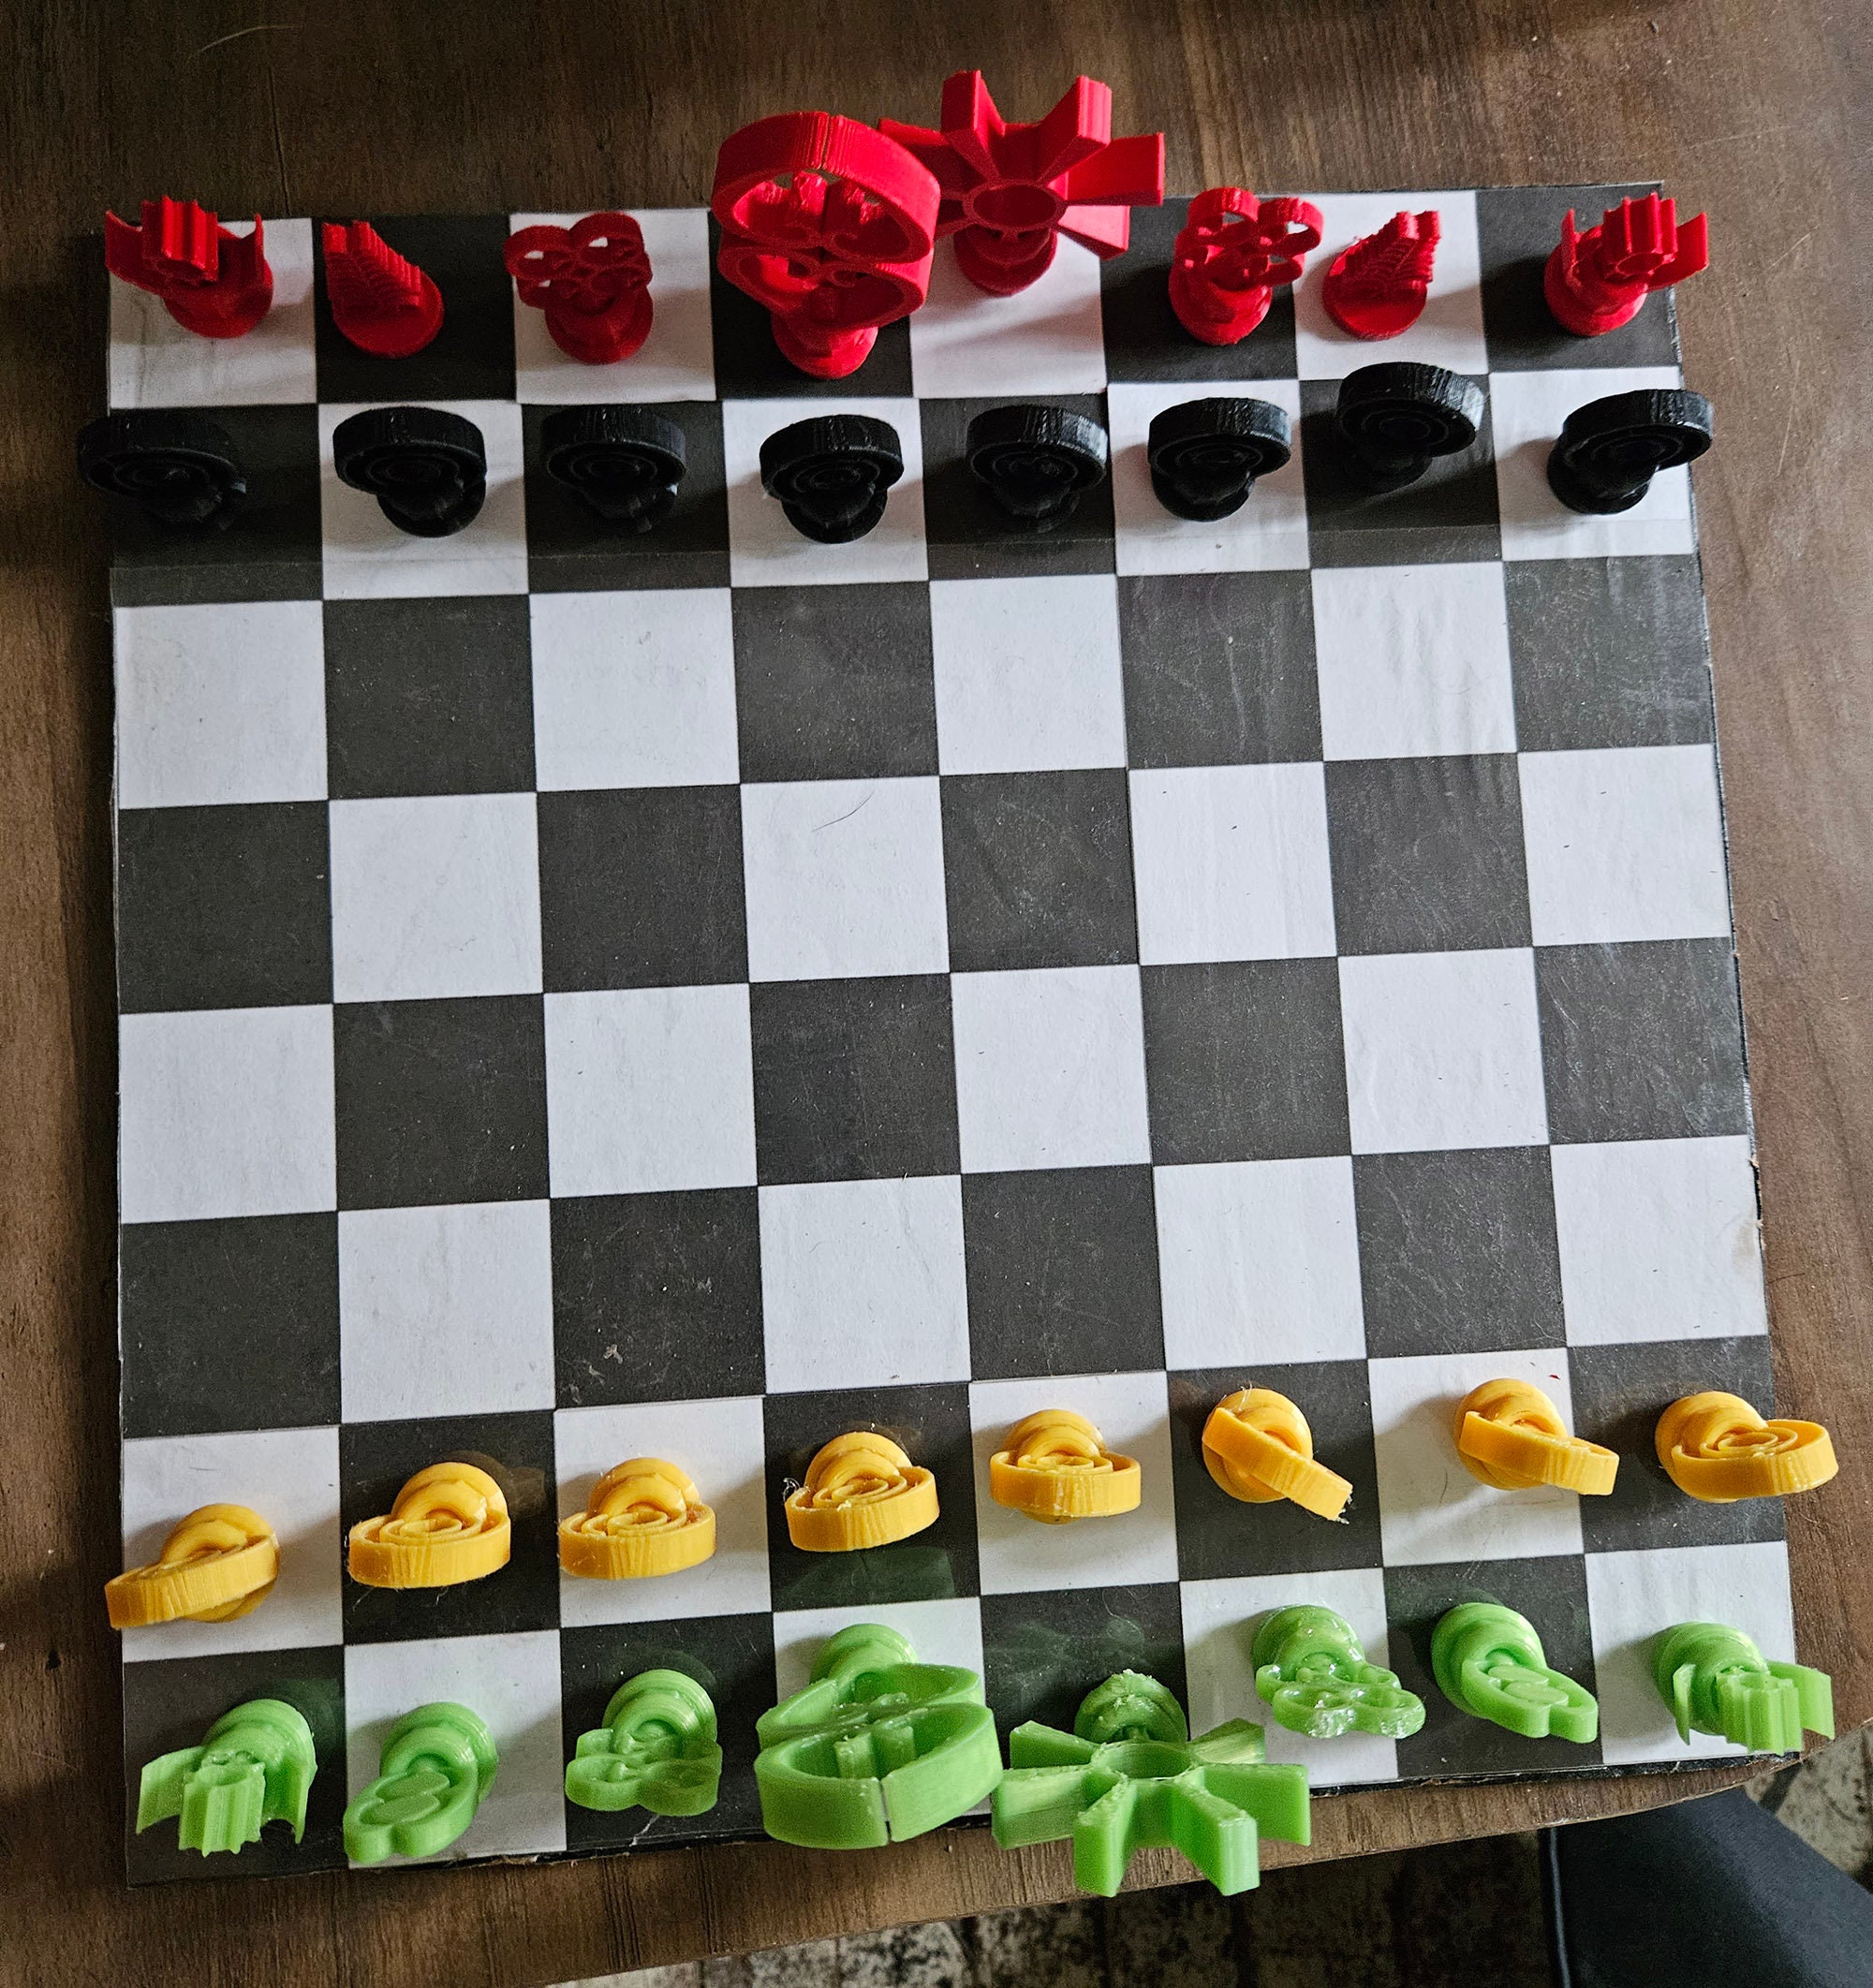 Boxing Themed 3D Printed Recycled Material Chess Board - in Red and Black